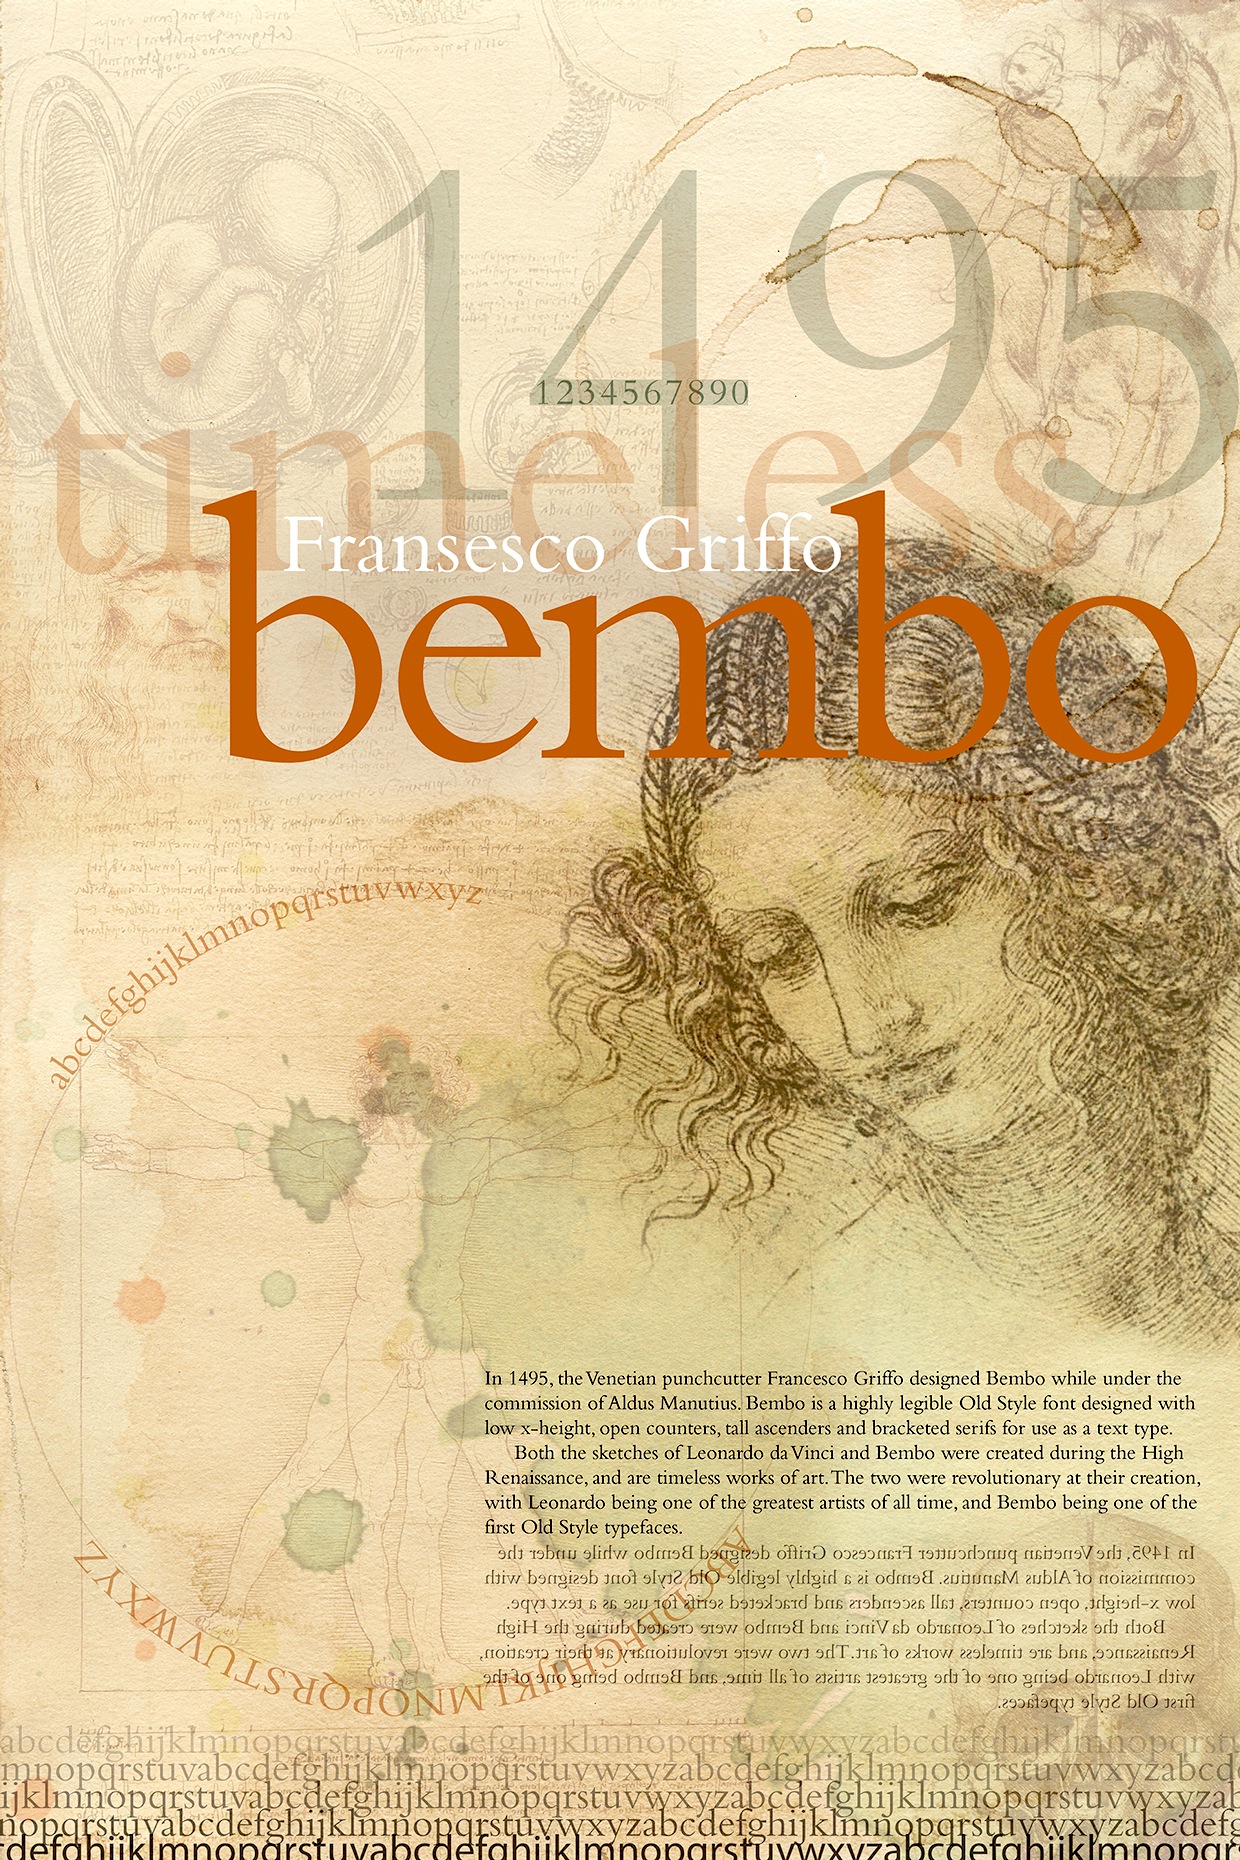 what is the history of the bembo typeface